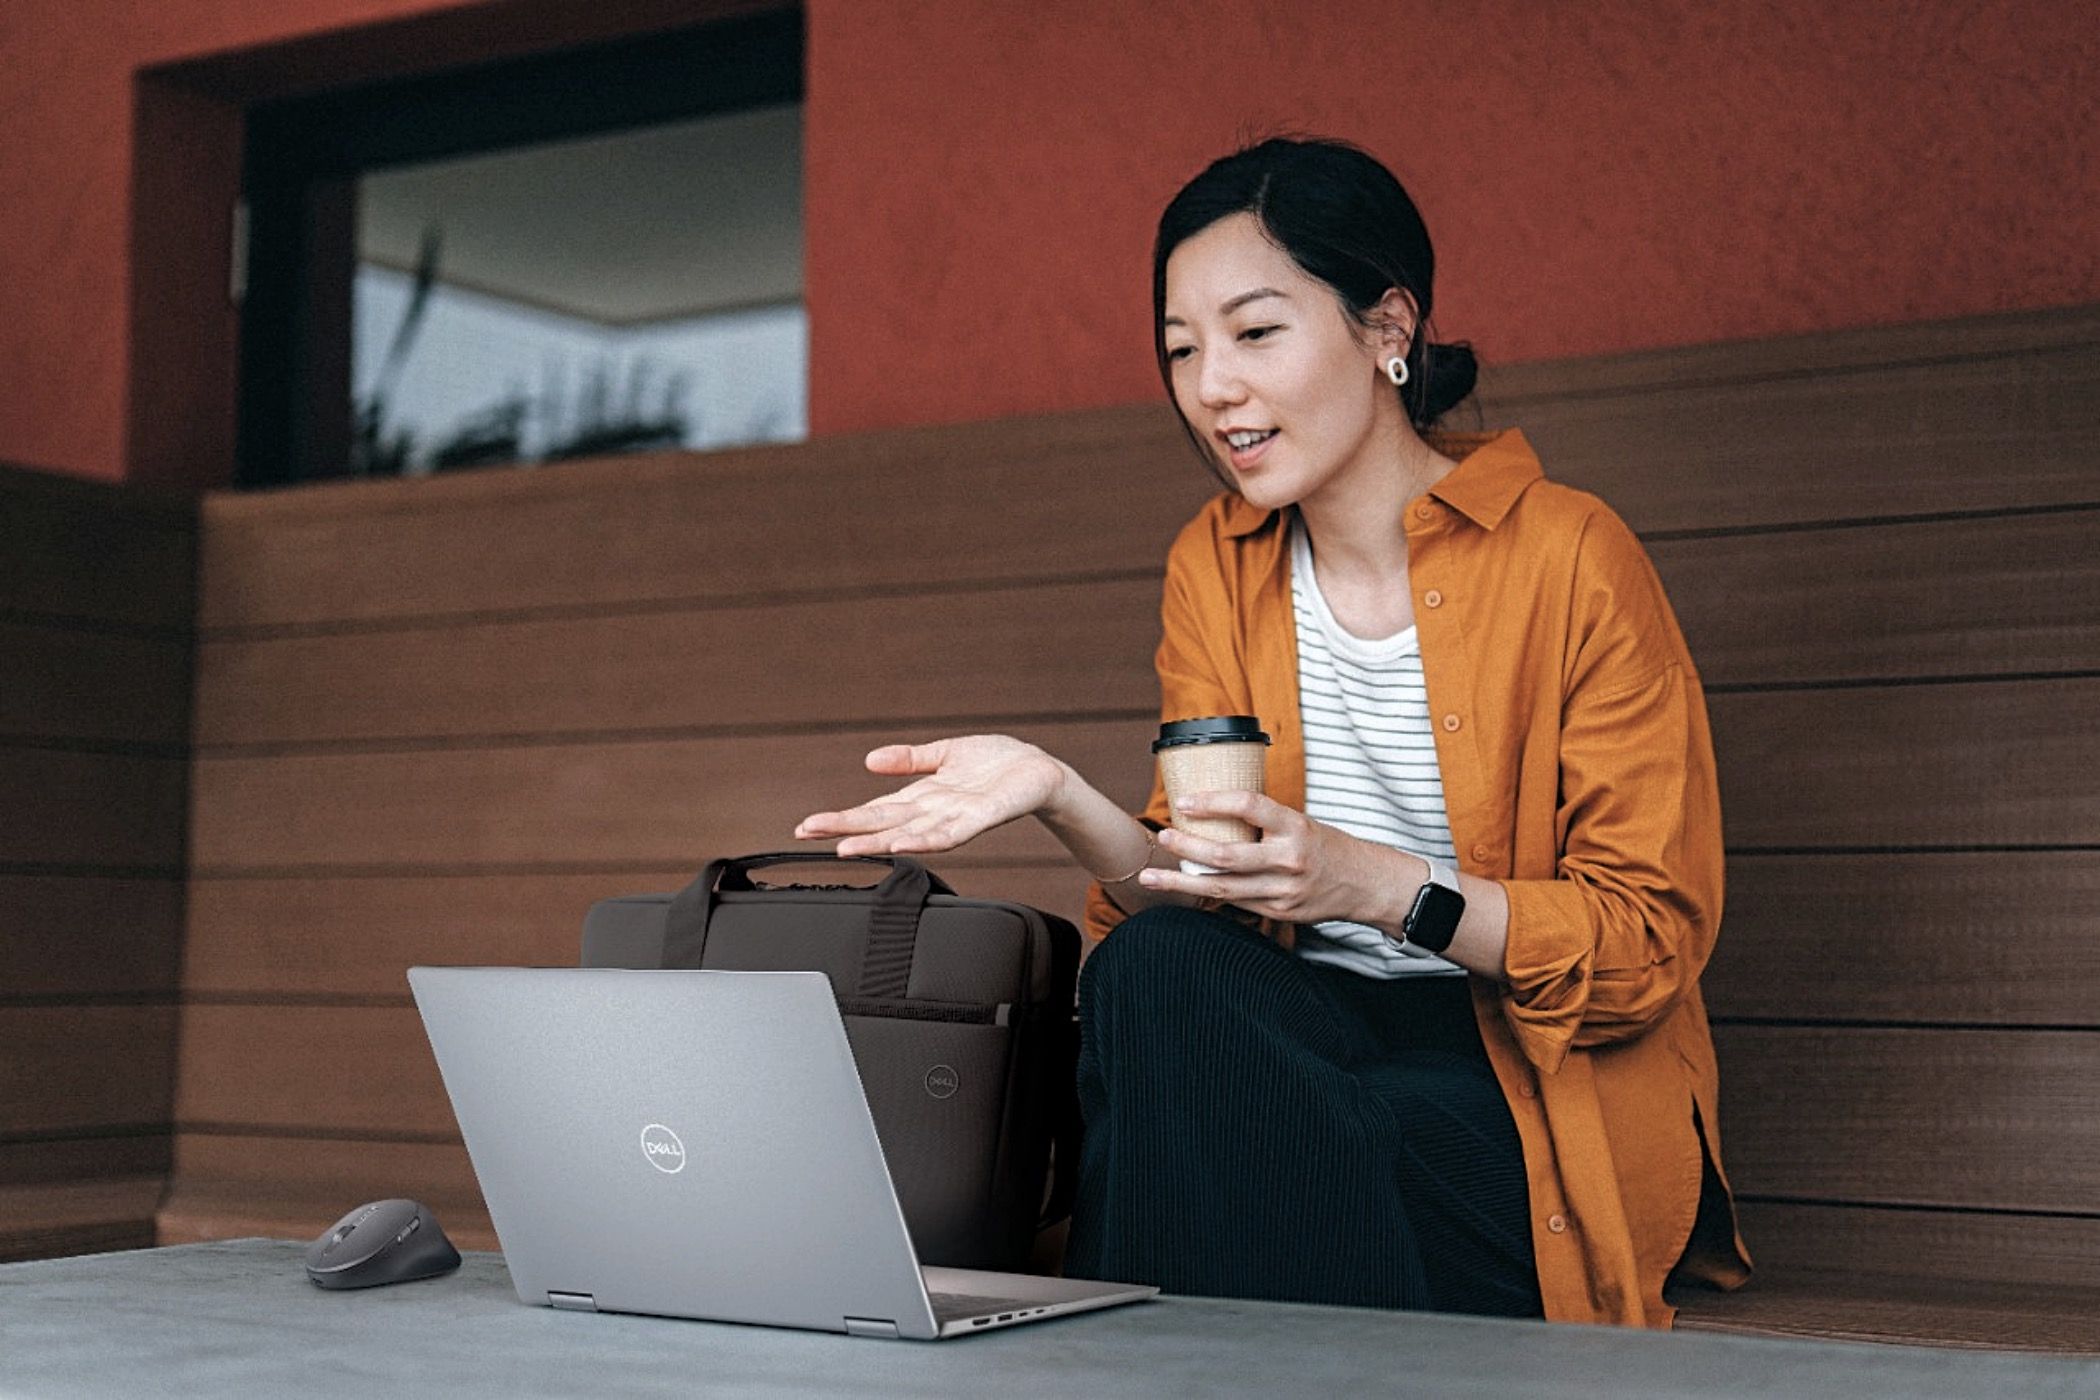 A woman drinking coffee and chatting on her Dell laptop.